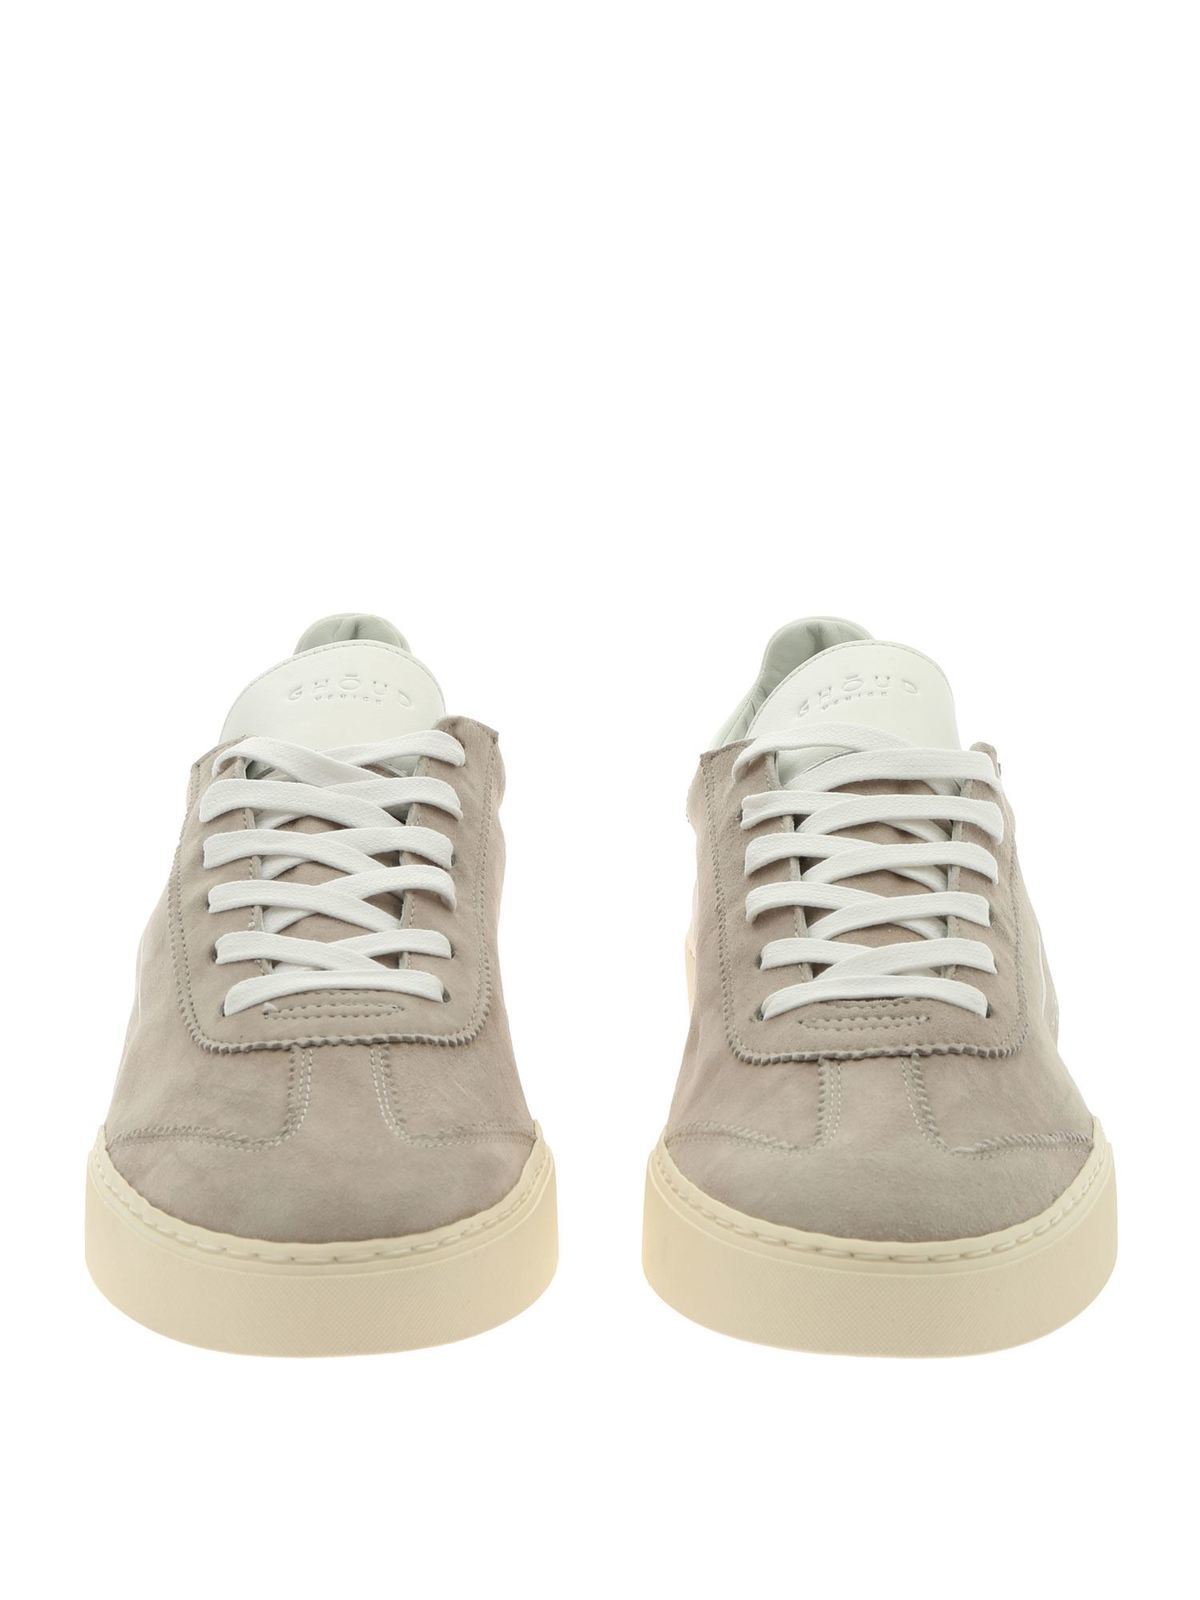 Trainers Ghoud Venice - Lob 01 gray sneakers in suede leather 